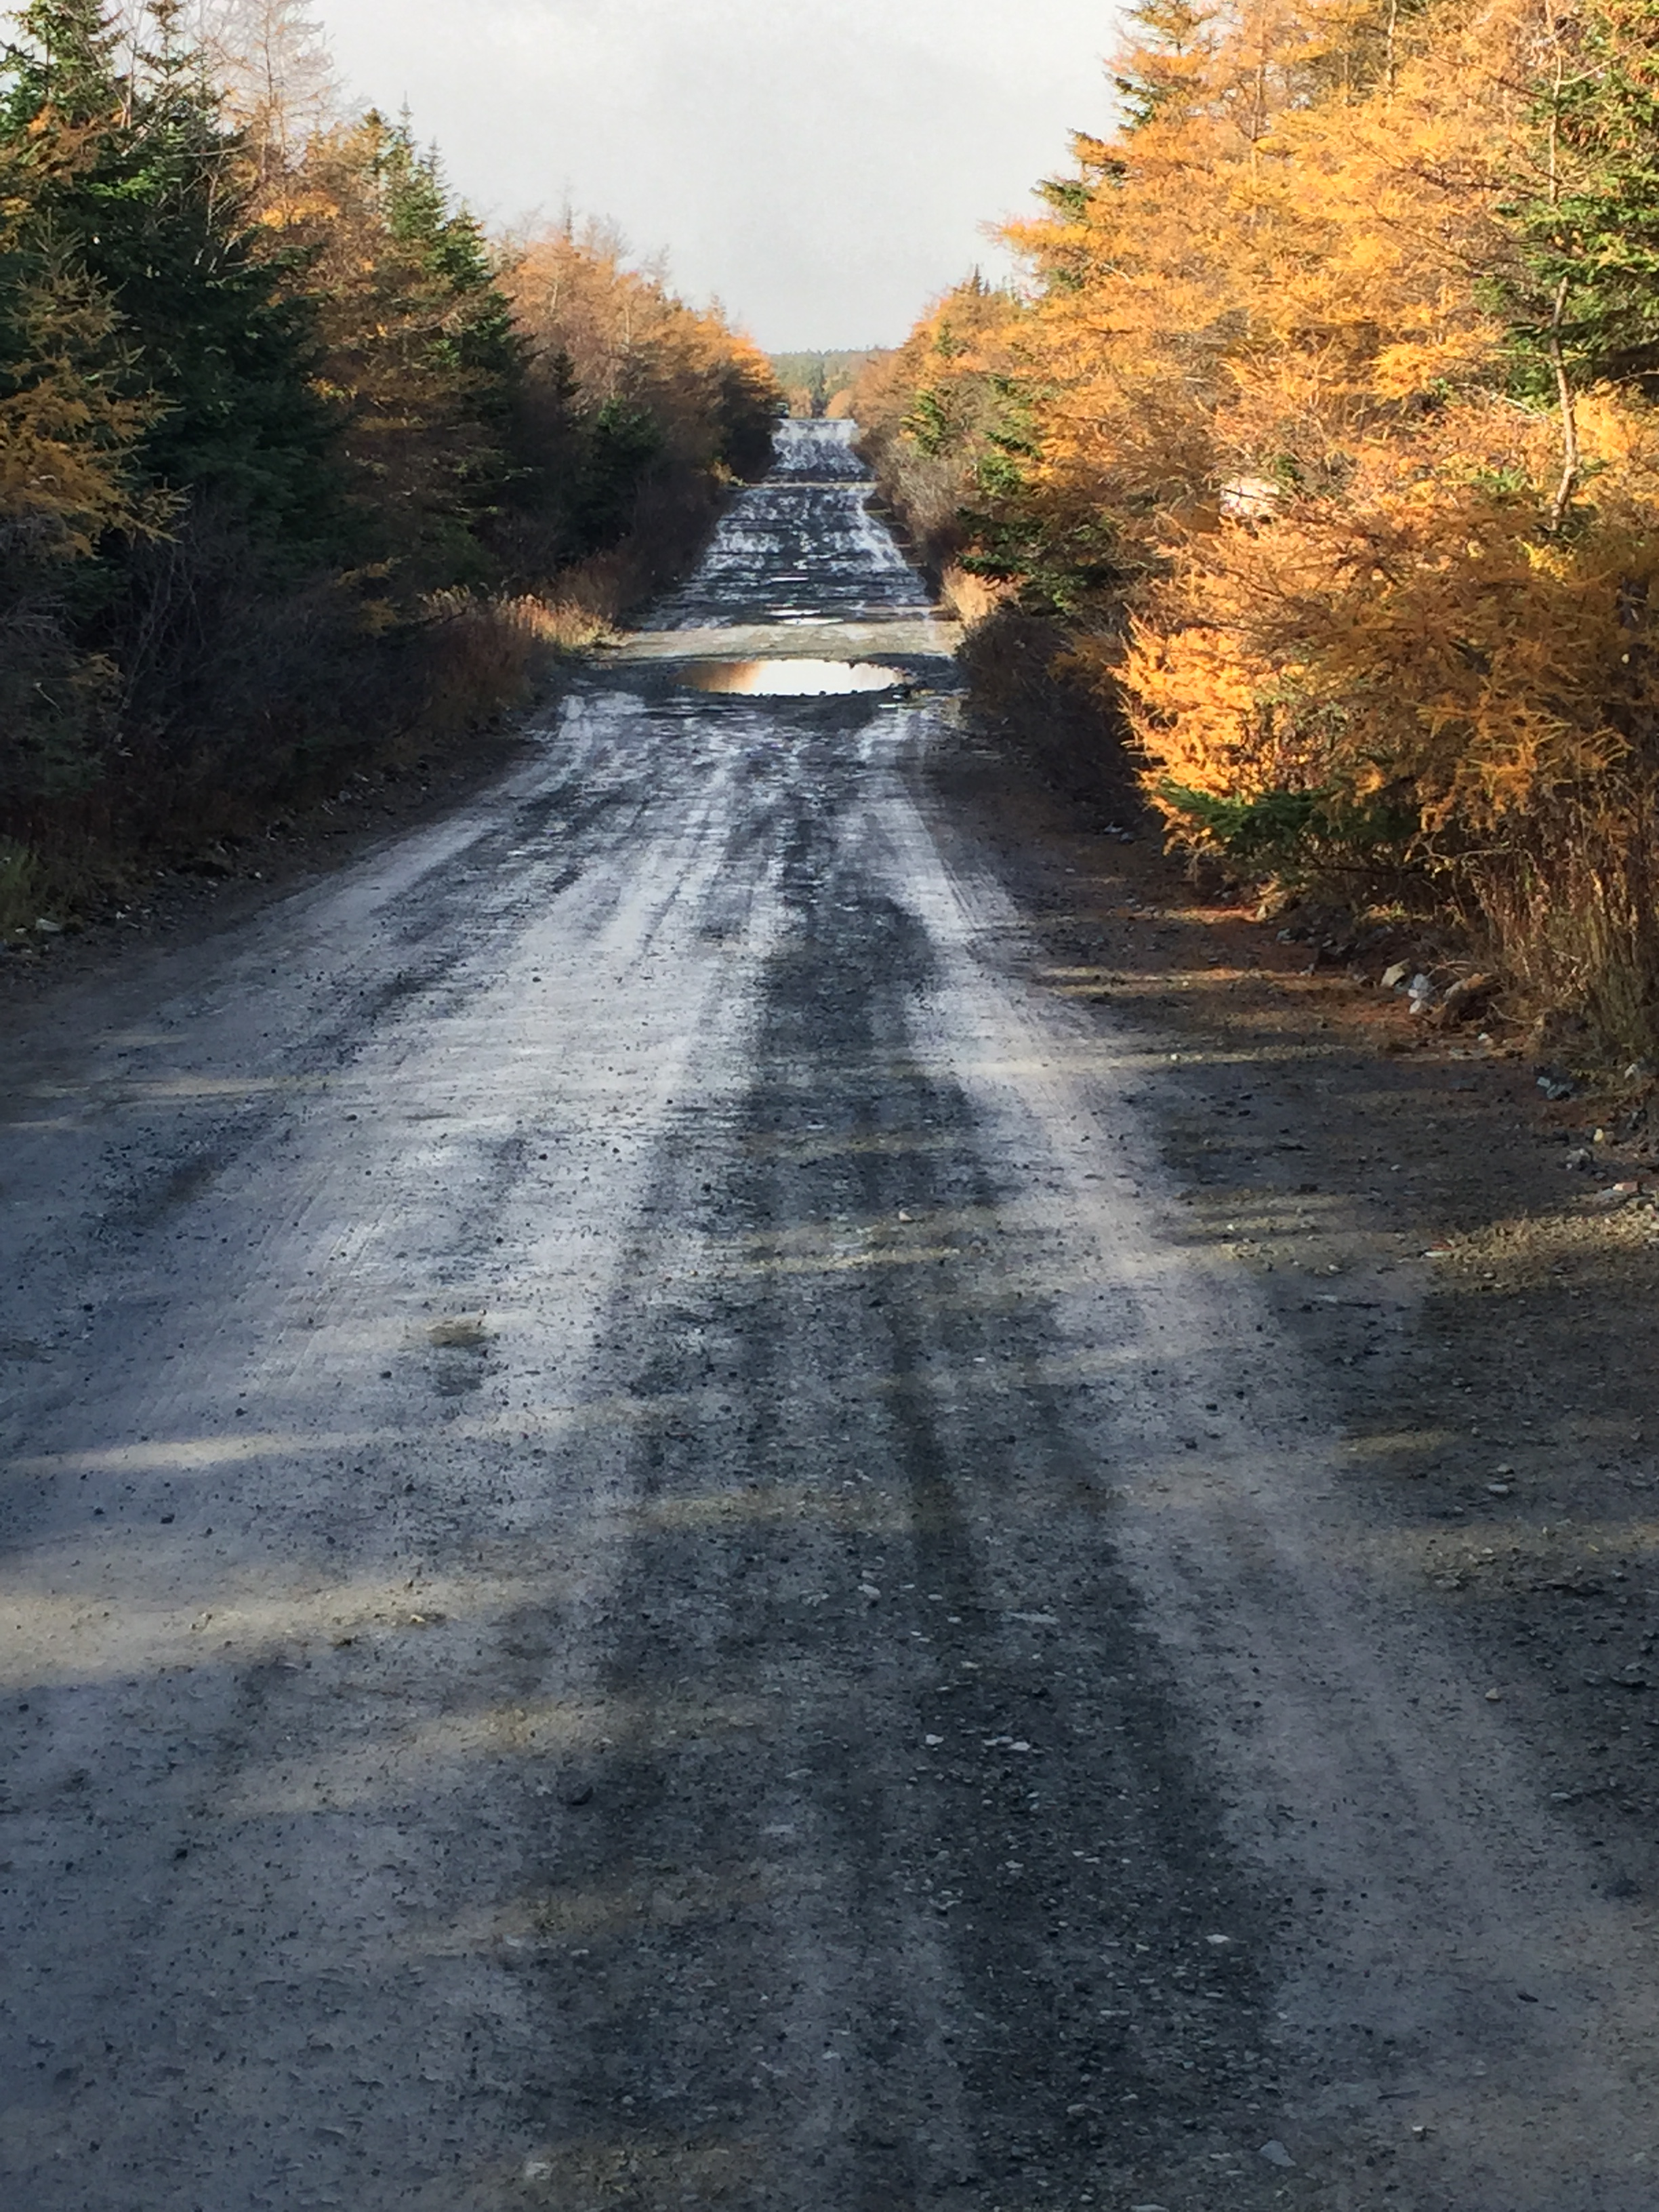 Typical Goulds back road conditions: wet and muddy.